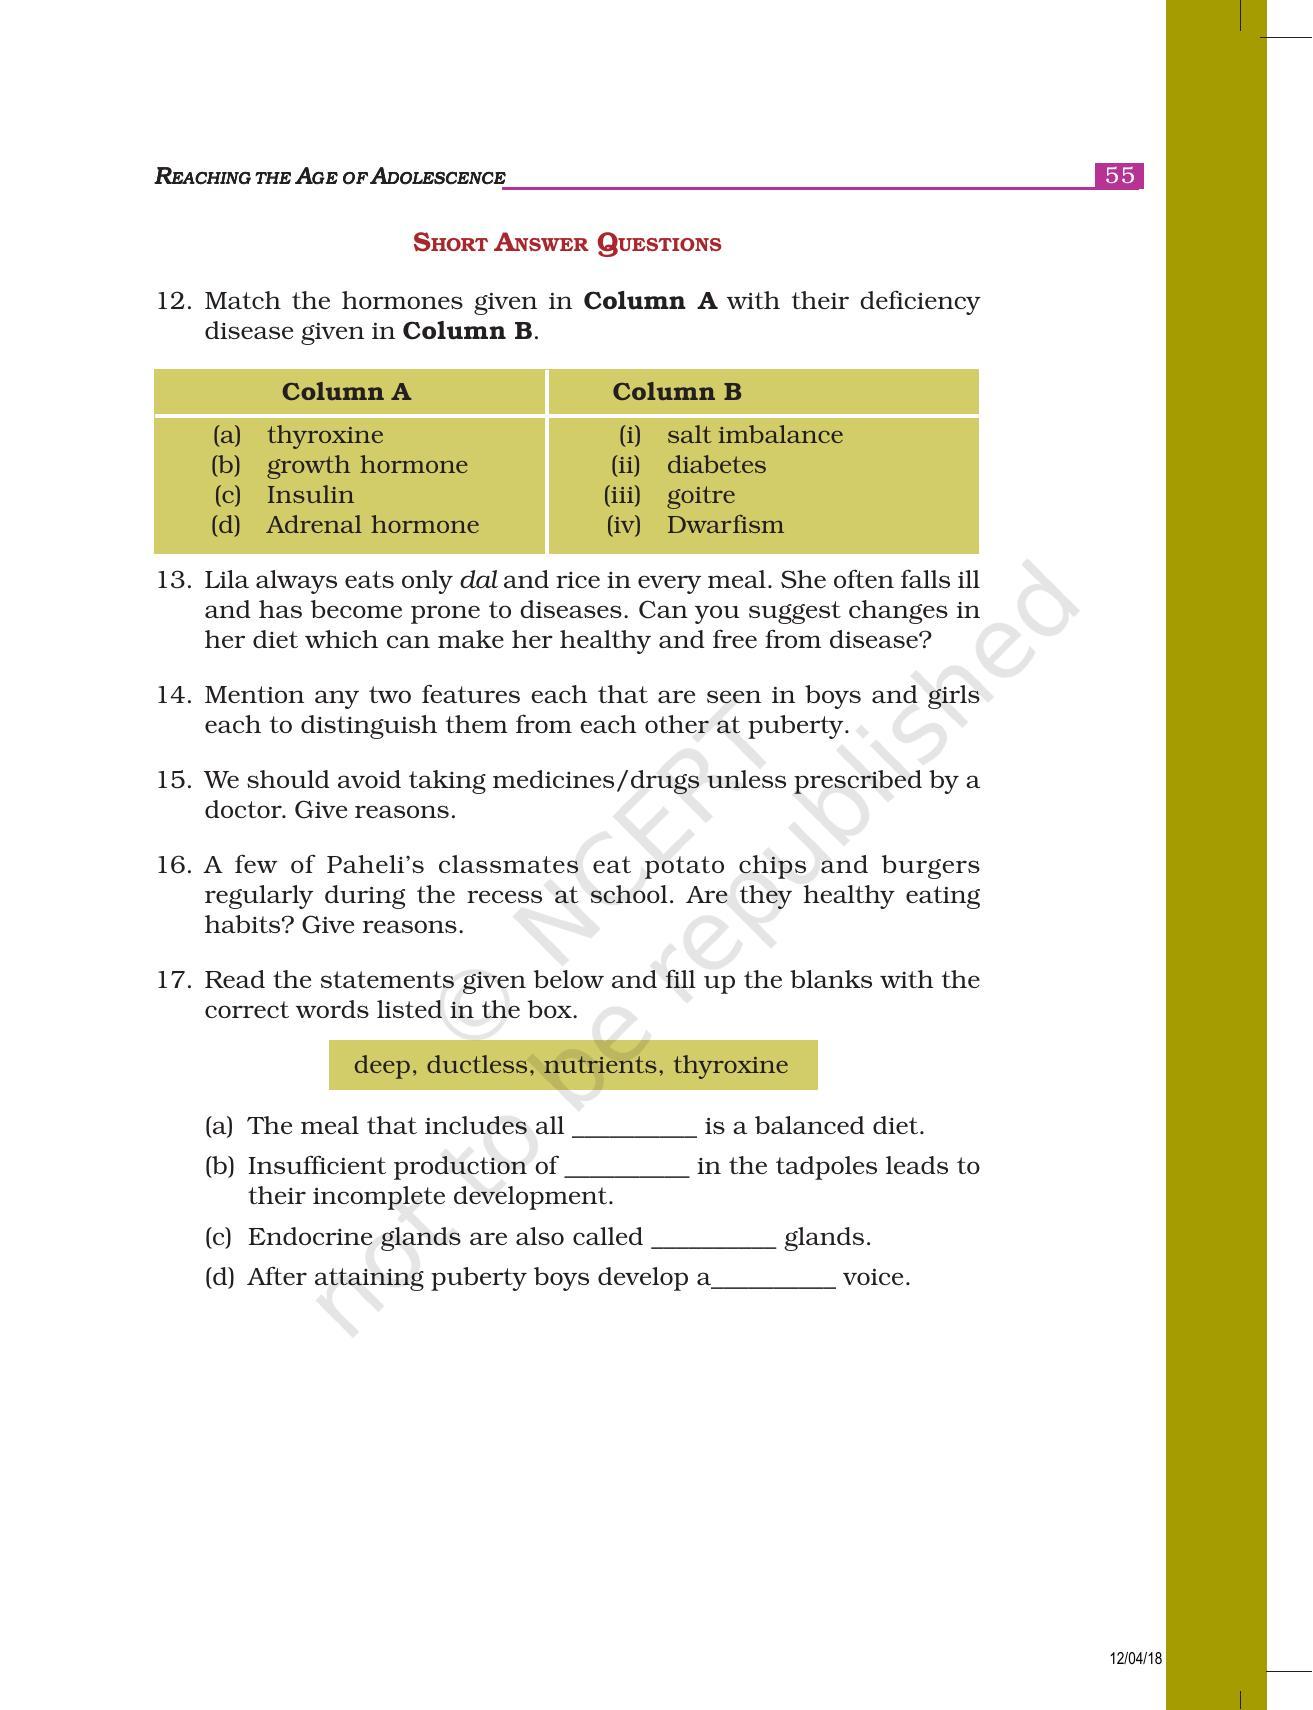 NCERT Exemplar Book for Class 8 Science: Chapter 10- Reaching the Age of Adolescence - Page 3